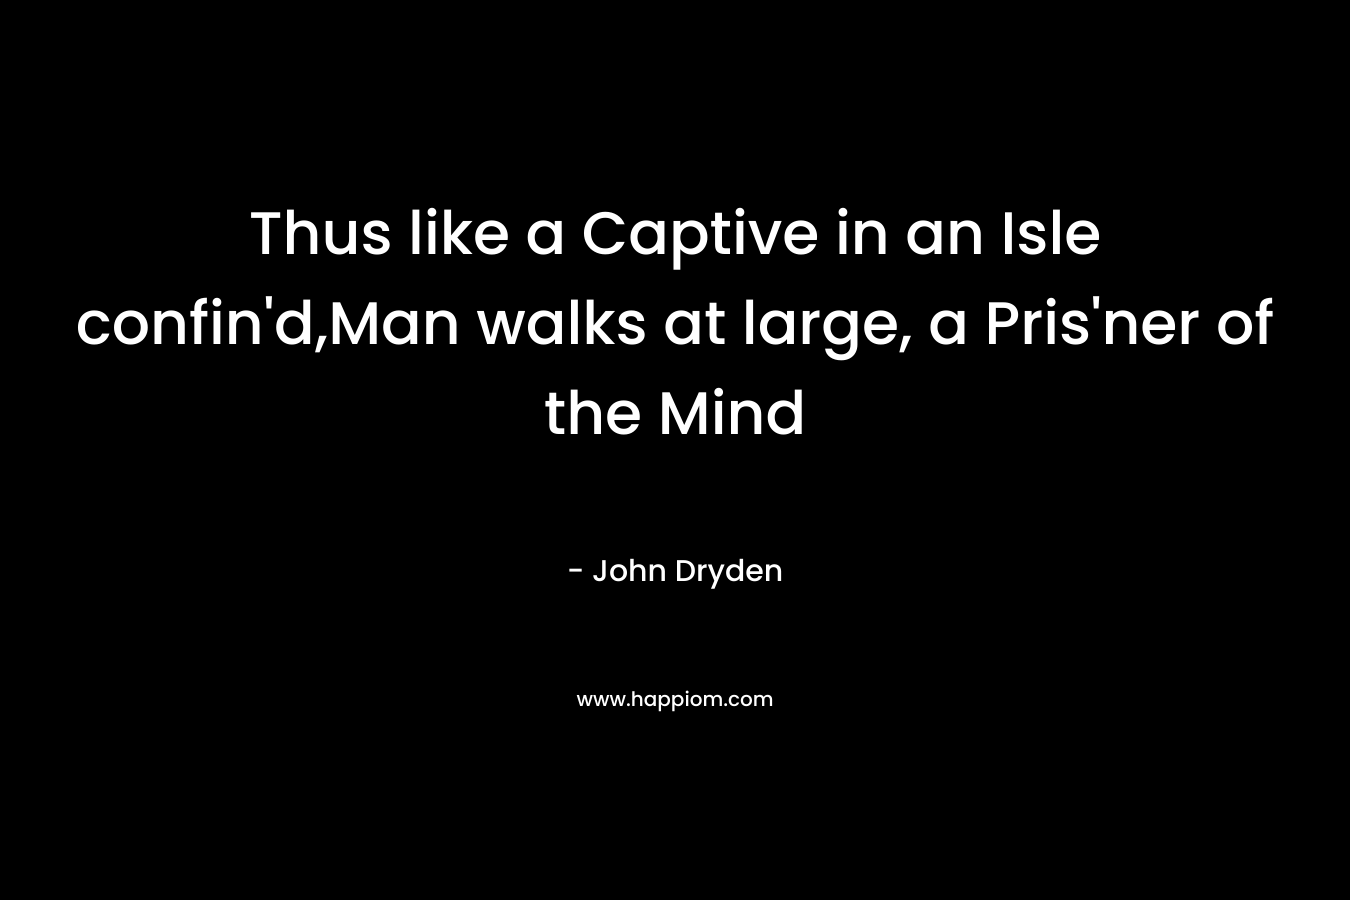 Thus like a Captive in an Isle confin’d,Man walks at large, a Pris’ner of the Mind – John Dryden